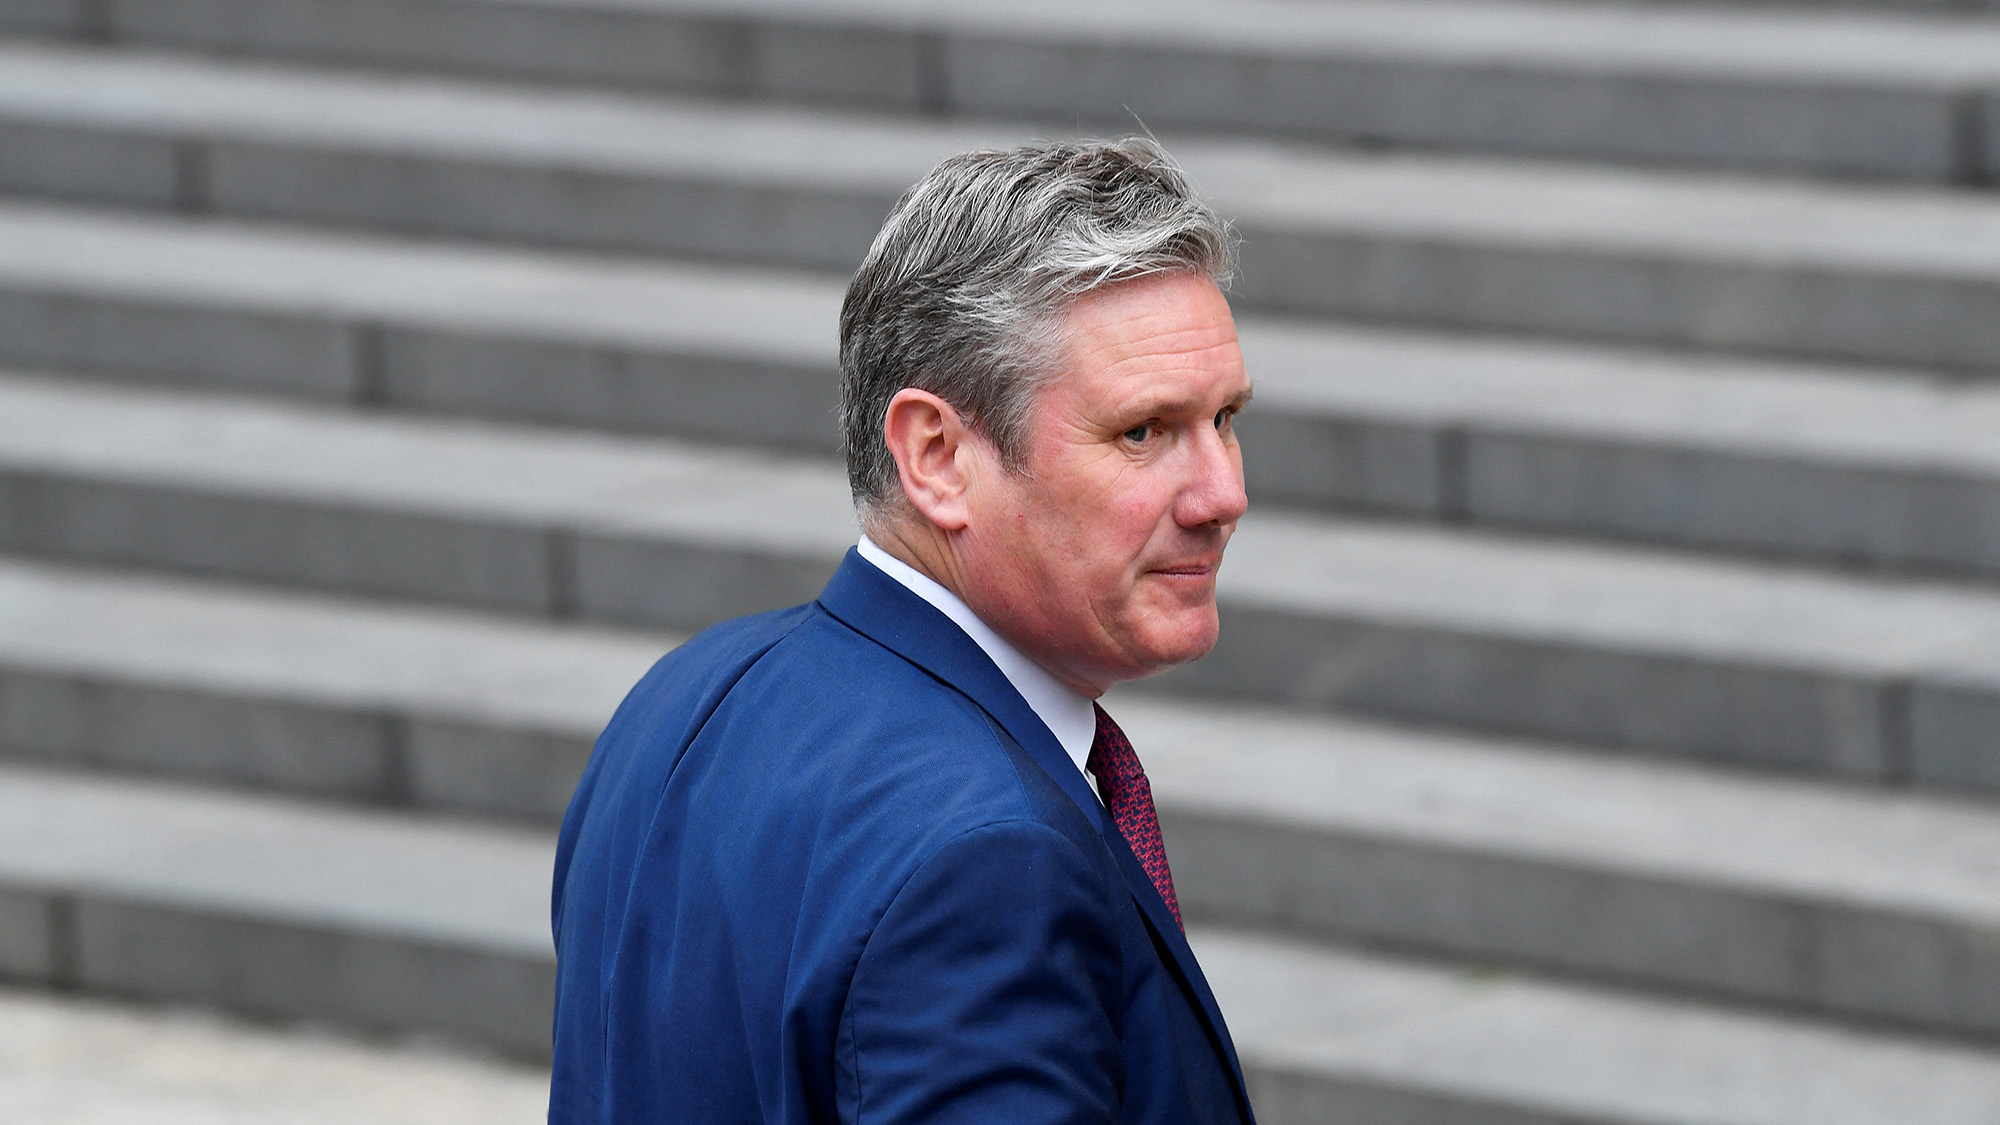 British Labour Party leader Keir Starmer arrives for the National Service of Thanksgiving at St Paul's Cathedral in London on June 3.